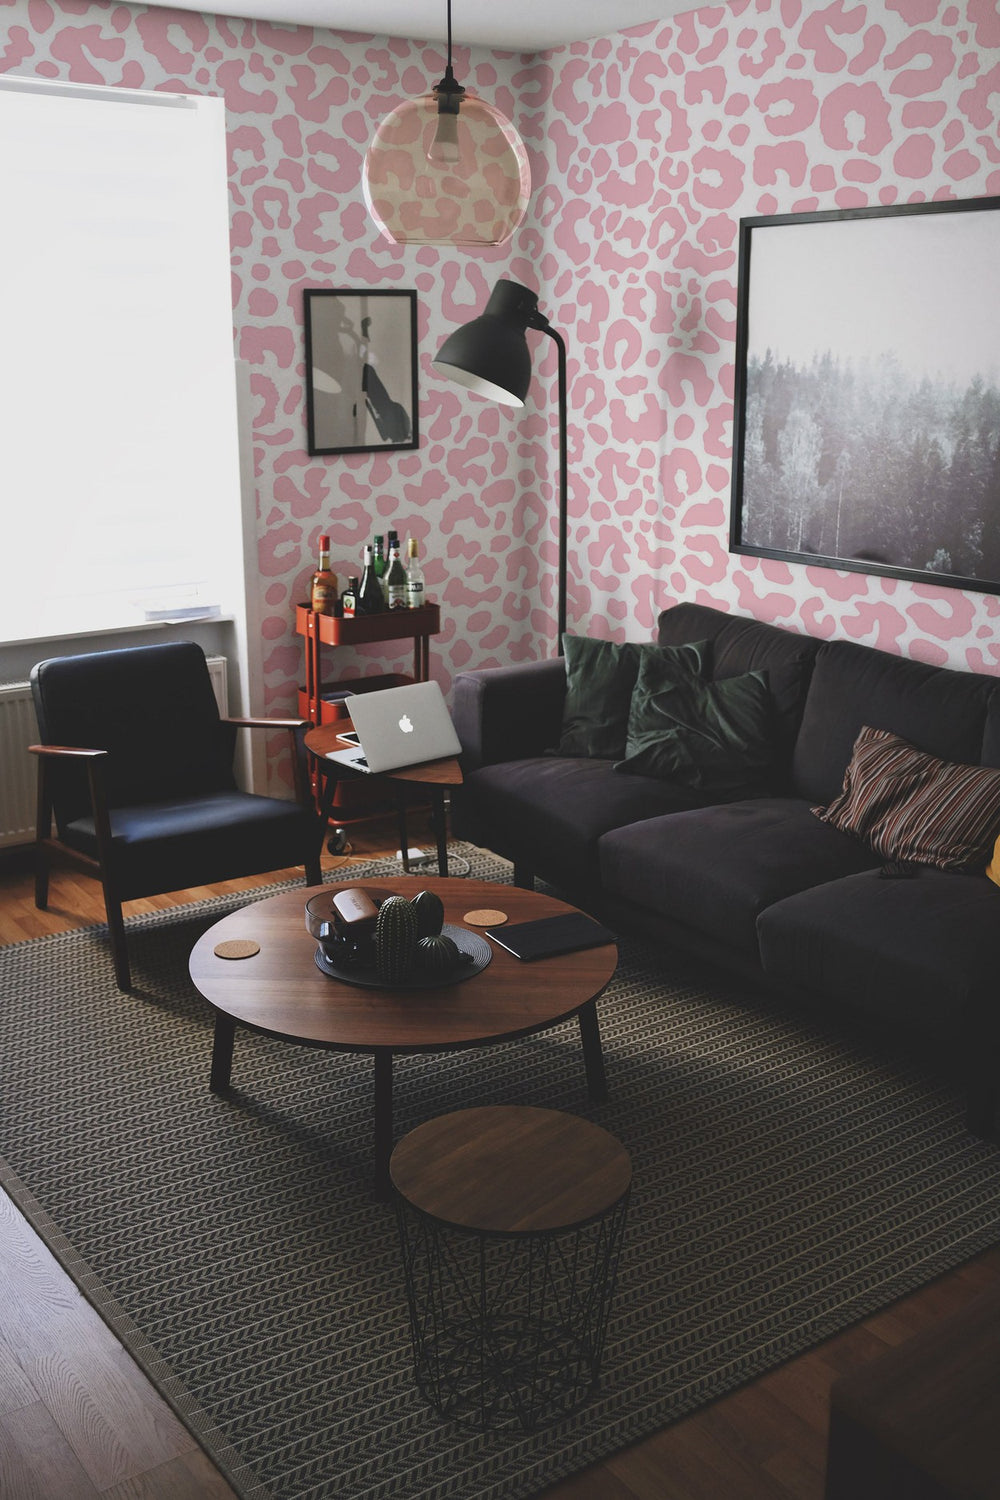 Interior of a modern living room featuring a sofa, coffee tables, and a wall mural with an abstract pattern.